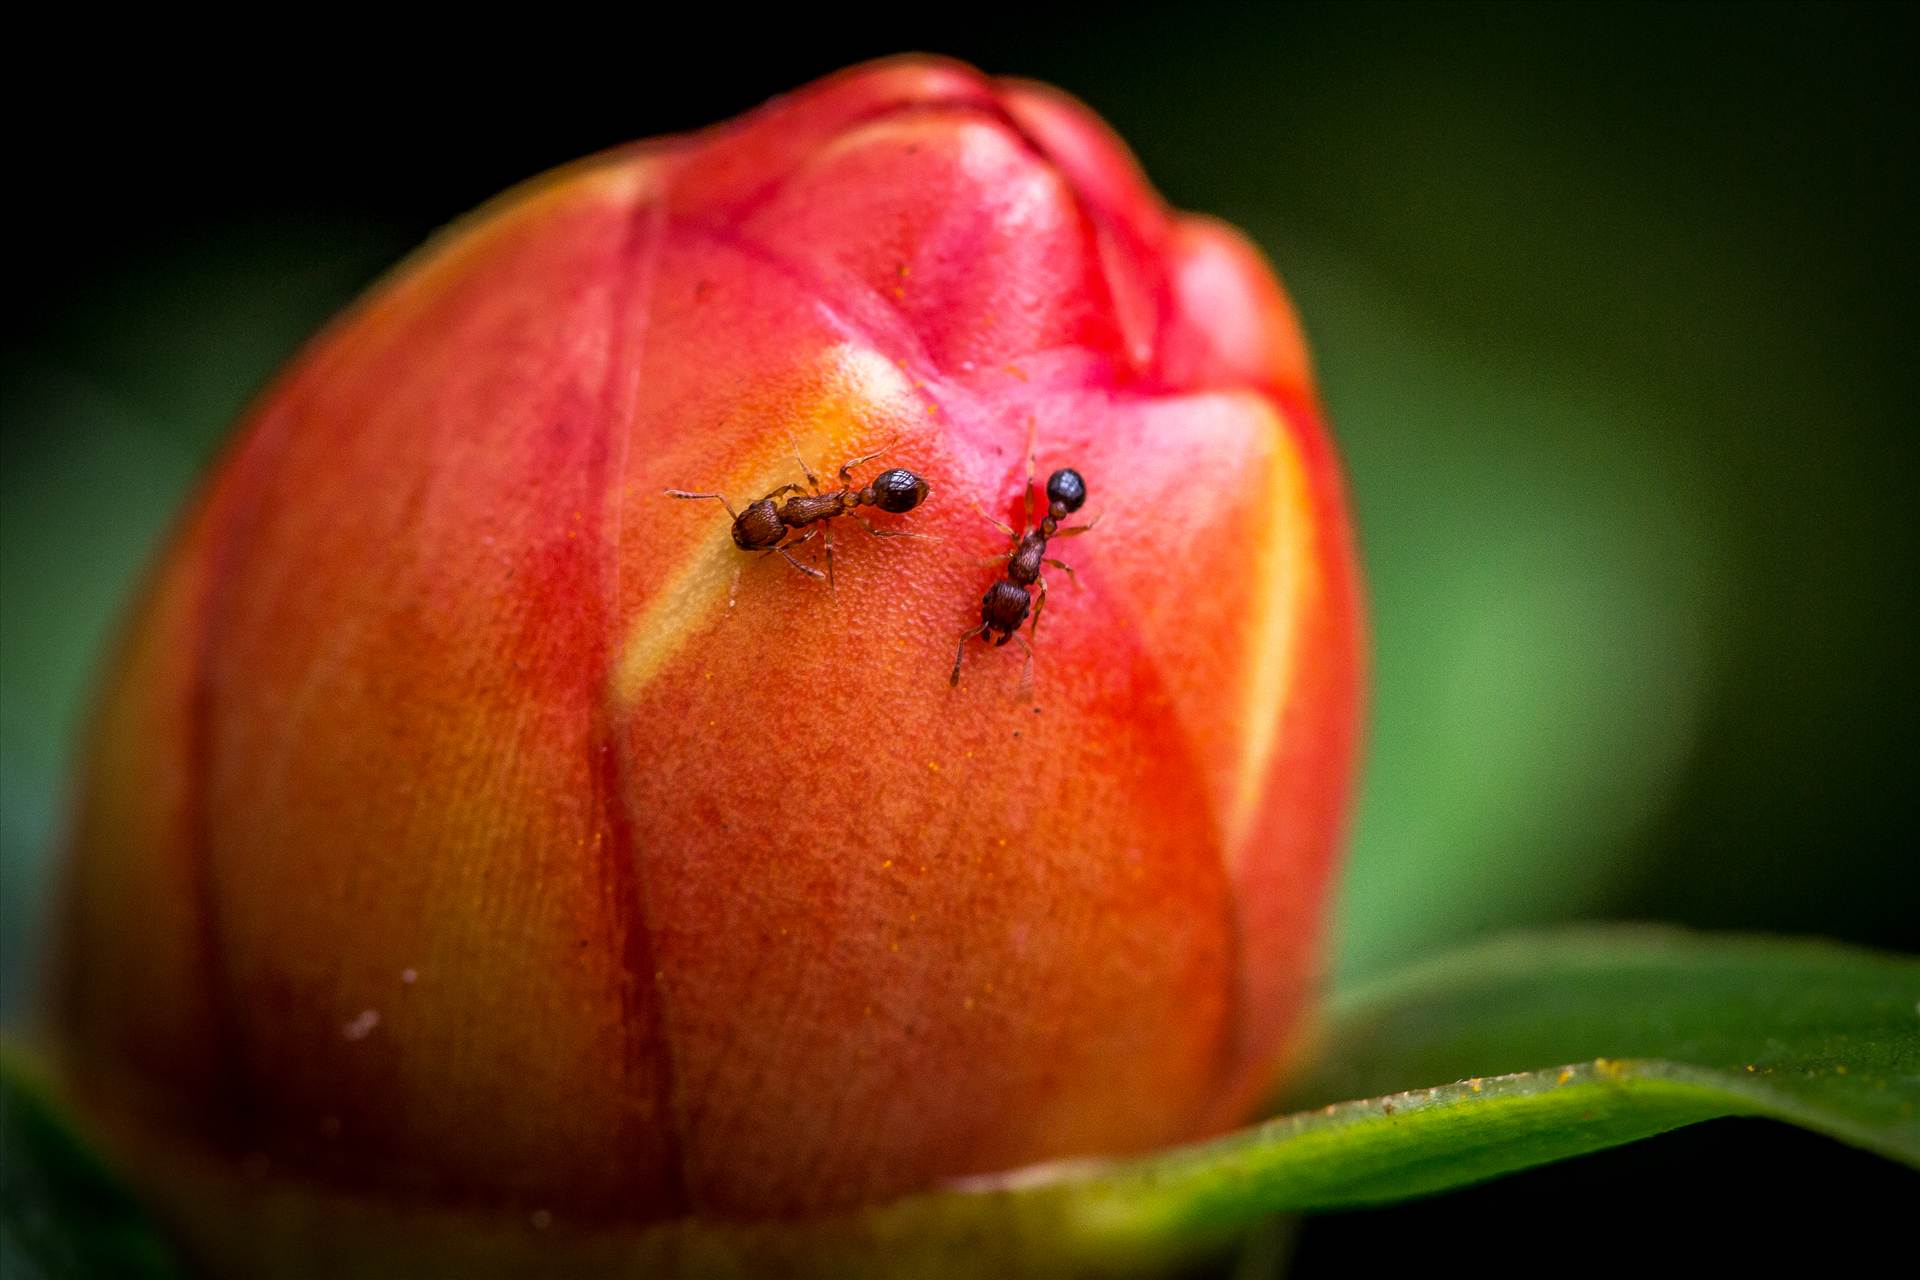 Ant Activity - A pair of tiny ants crawling on a small flower bud. by Scott Smith Photos